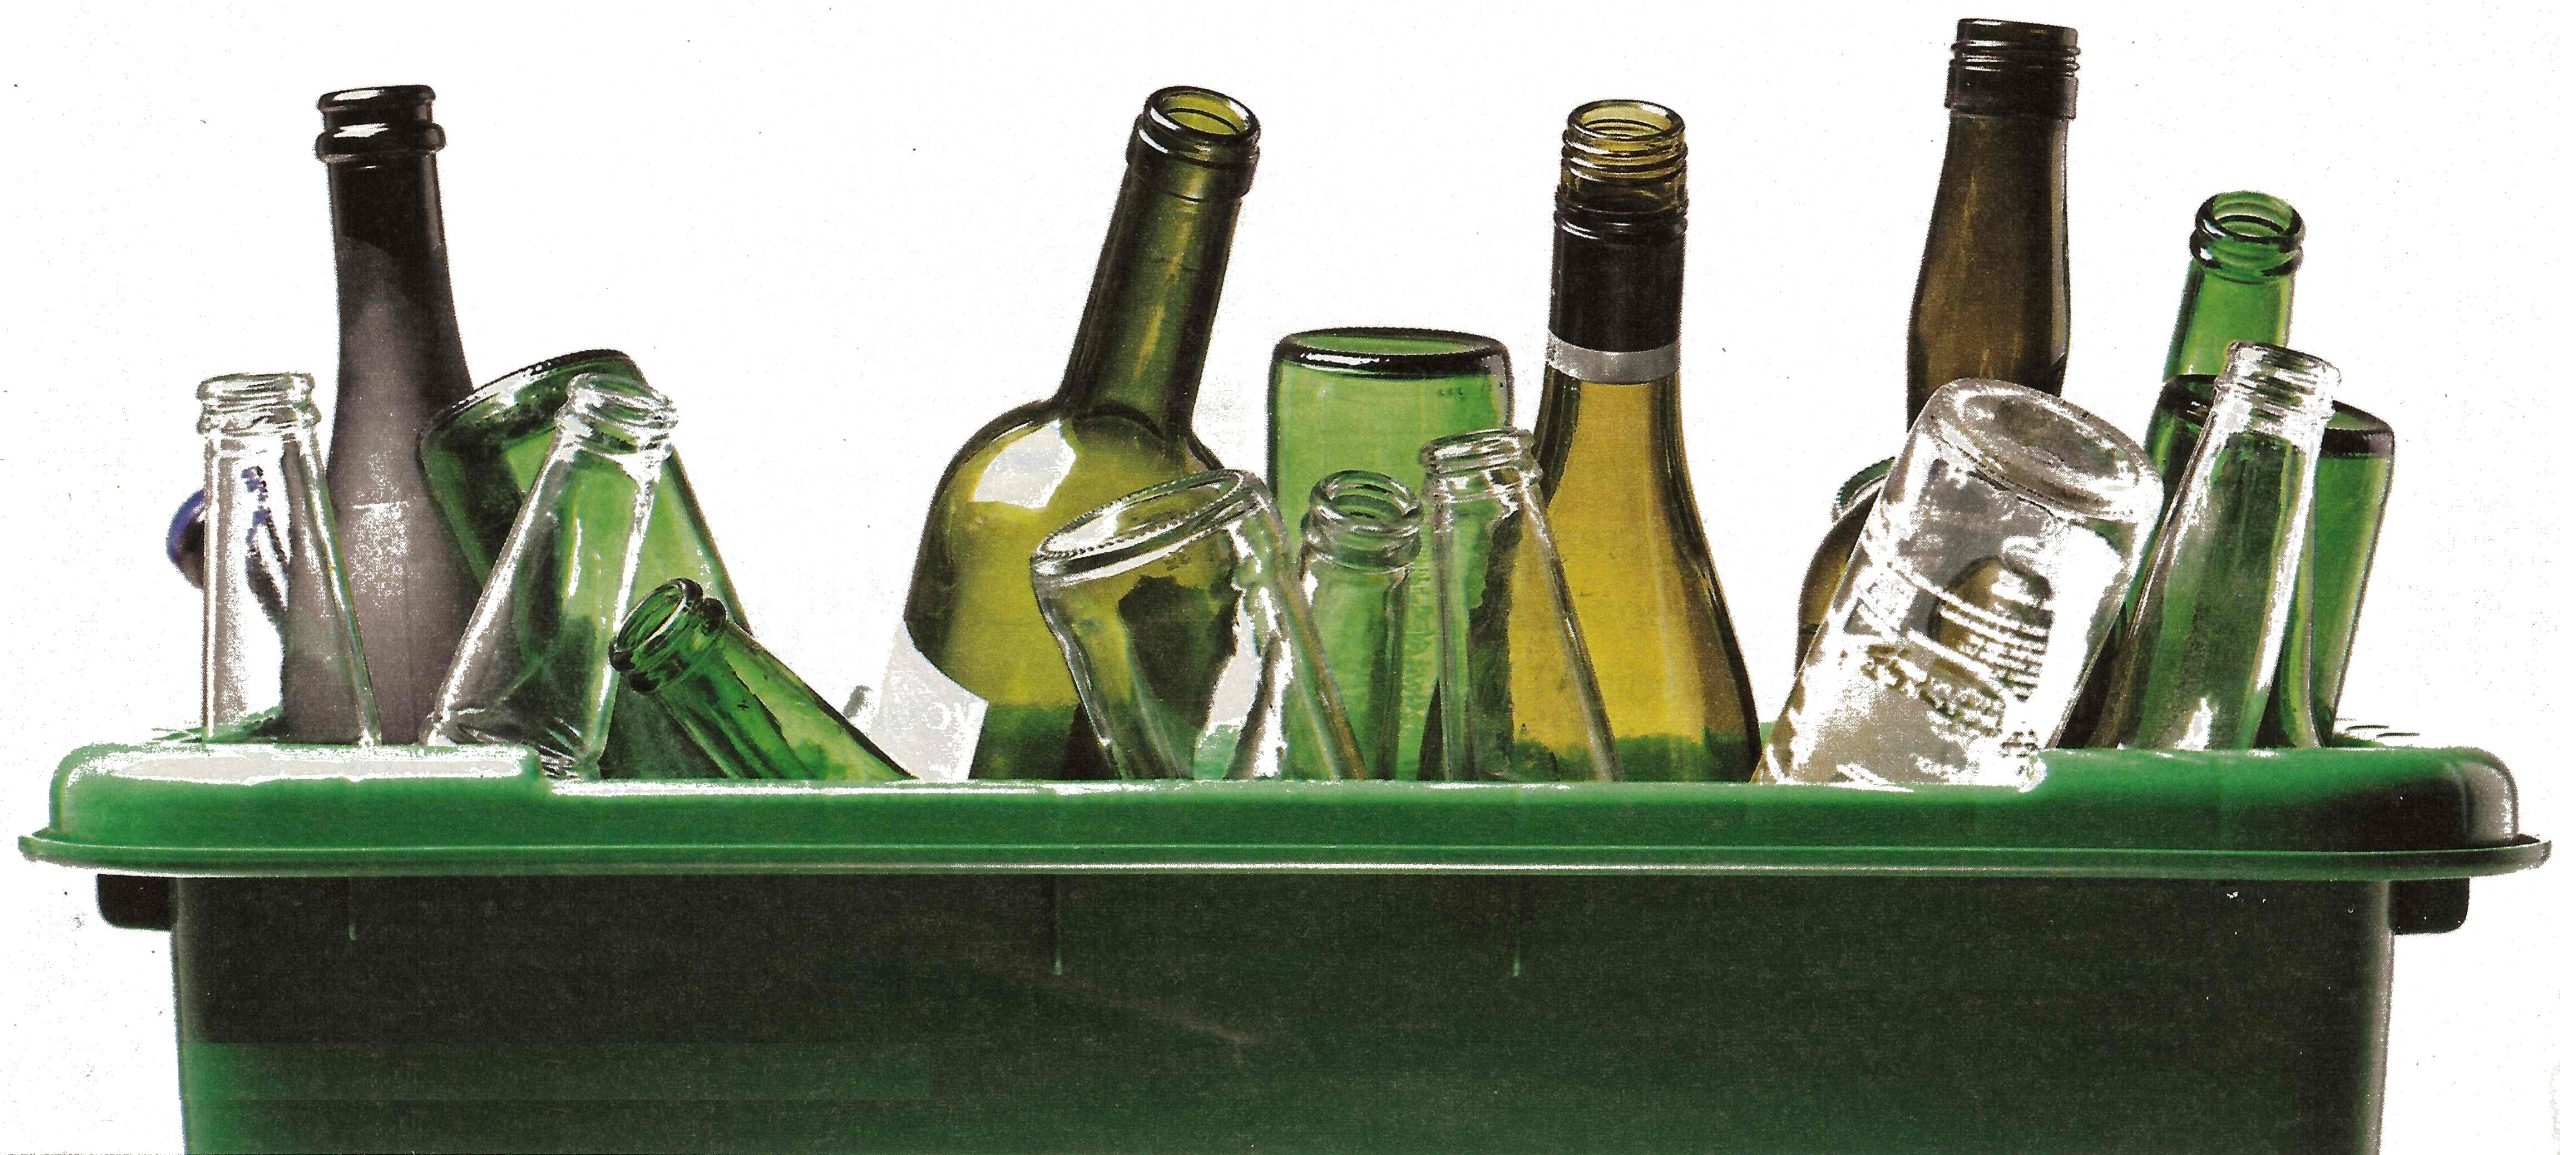 What Are the Benefits of Glass Recycling?